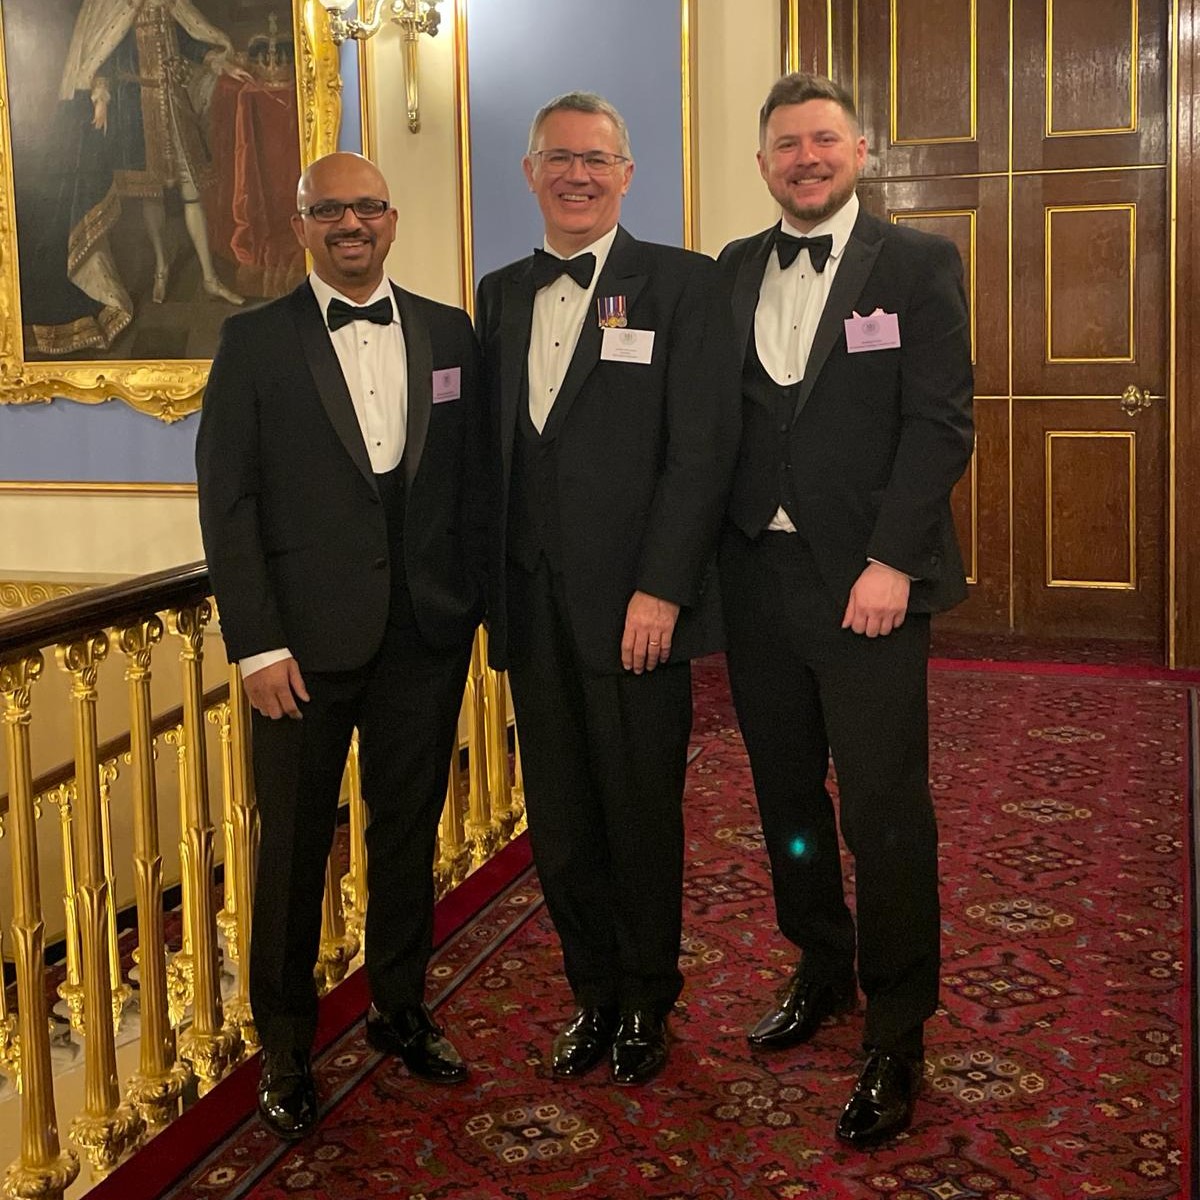 Brad and Kumaran, two of our Engineering lecturers recently attended the Royal Commission of the Exhibition 1851's Presidential Dinner at London's Fishmongers Hall! There were lots of opportunities for discussions, celebrating achievements in education and the STEM sector.